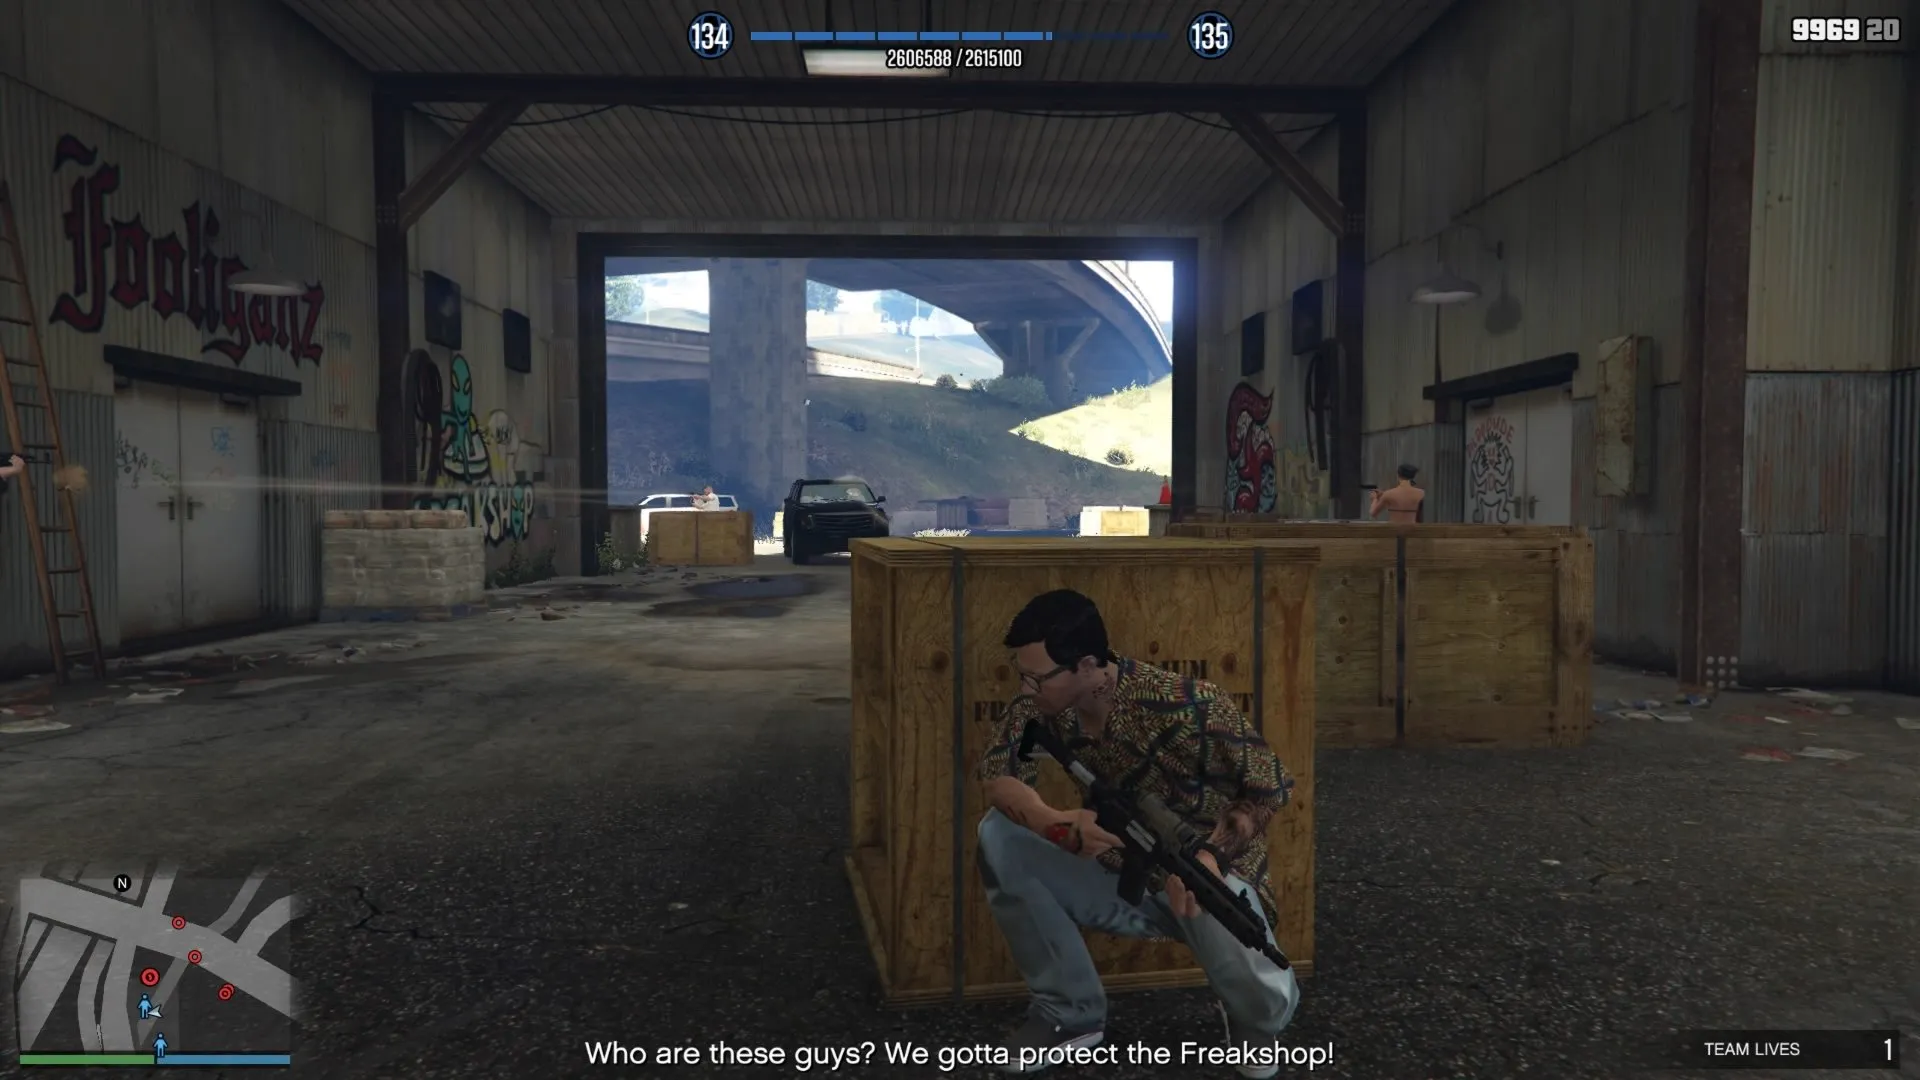 How to Complete This is an Intervention Mission in GTA Online – The Last Dose